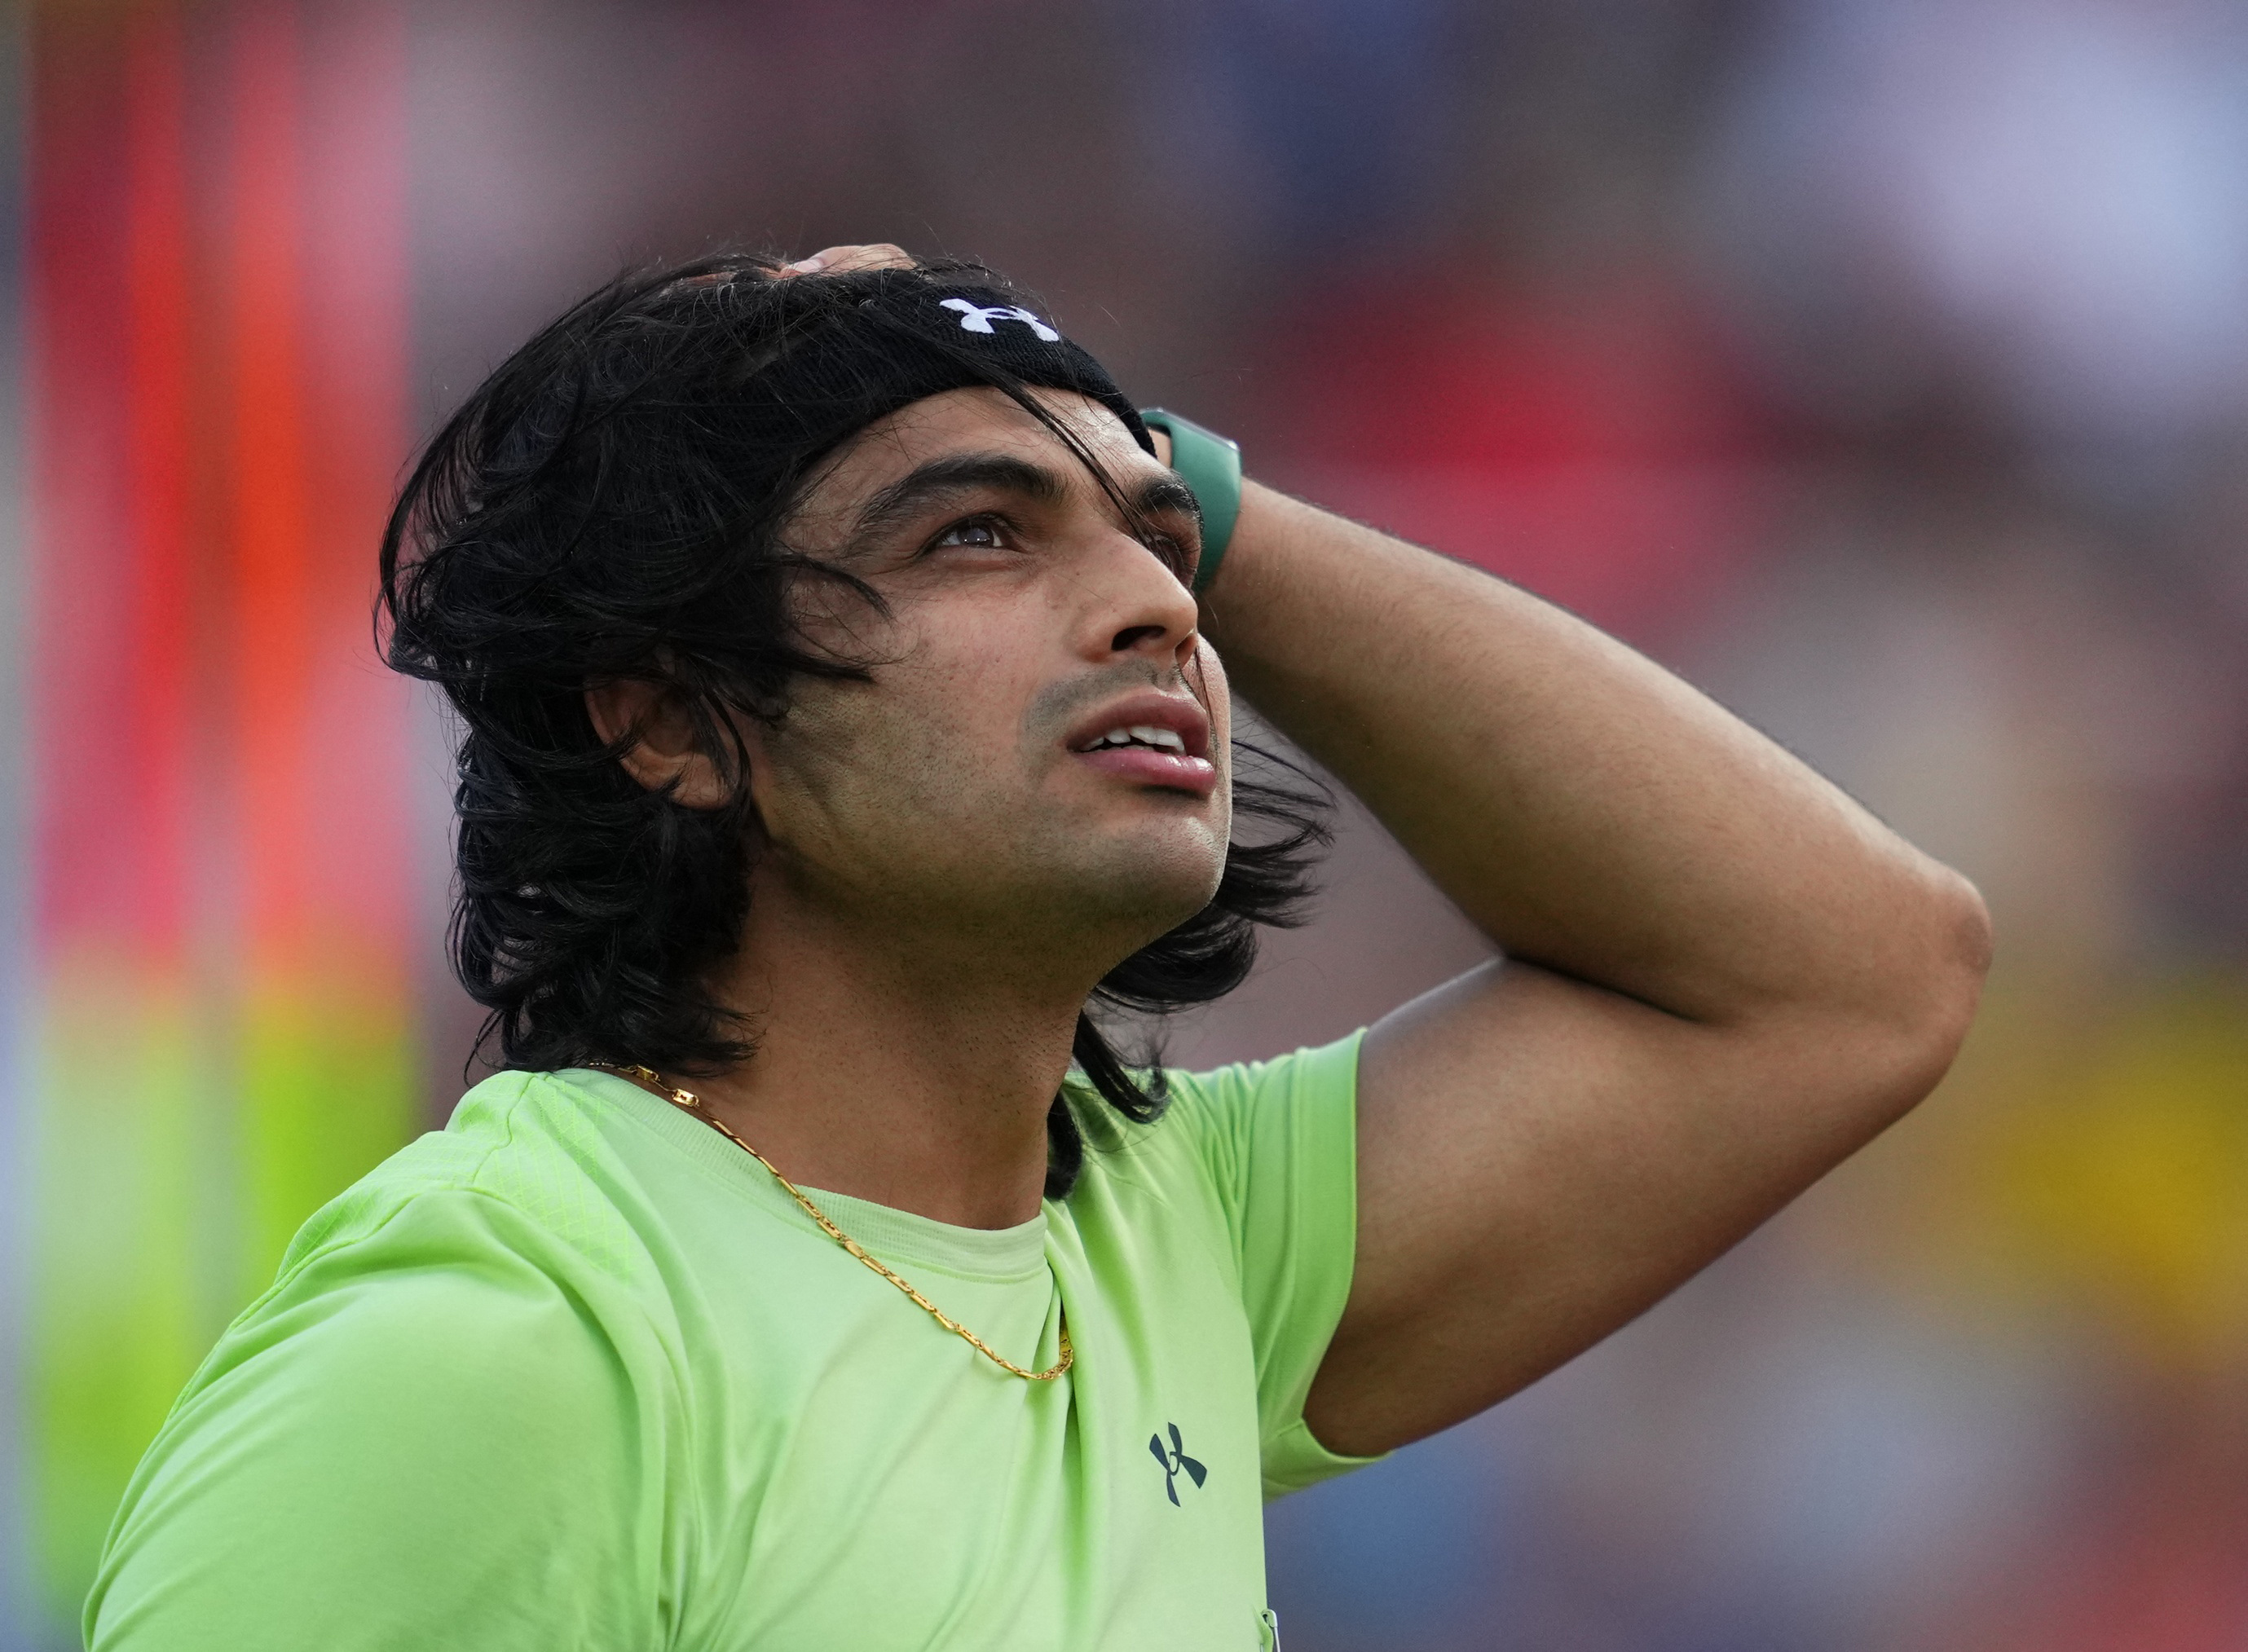 Watch: Neeraj Chopra breaks his own national record again, finishes second at Stockholm Diamond League